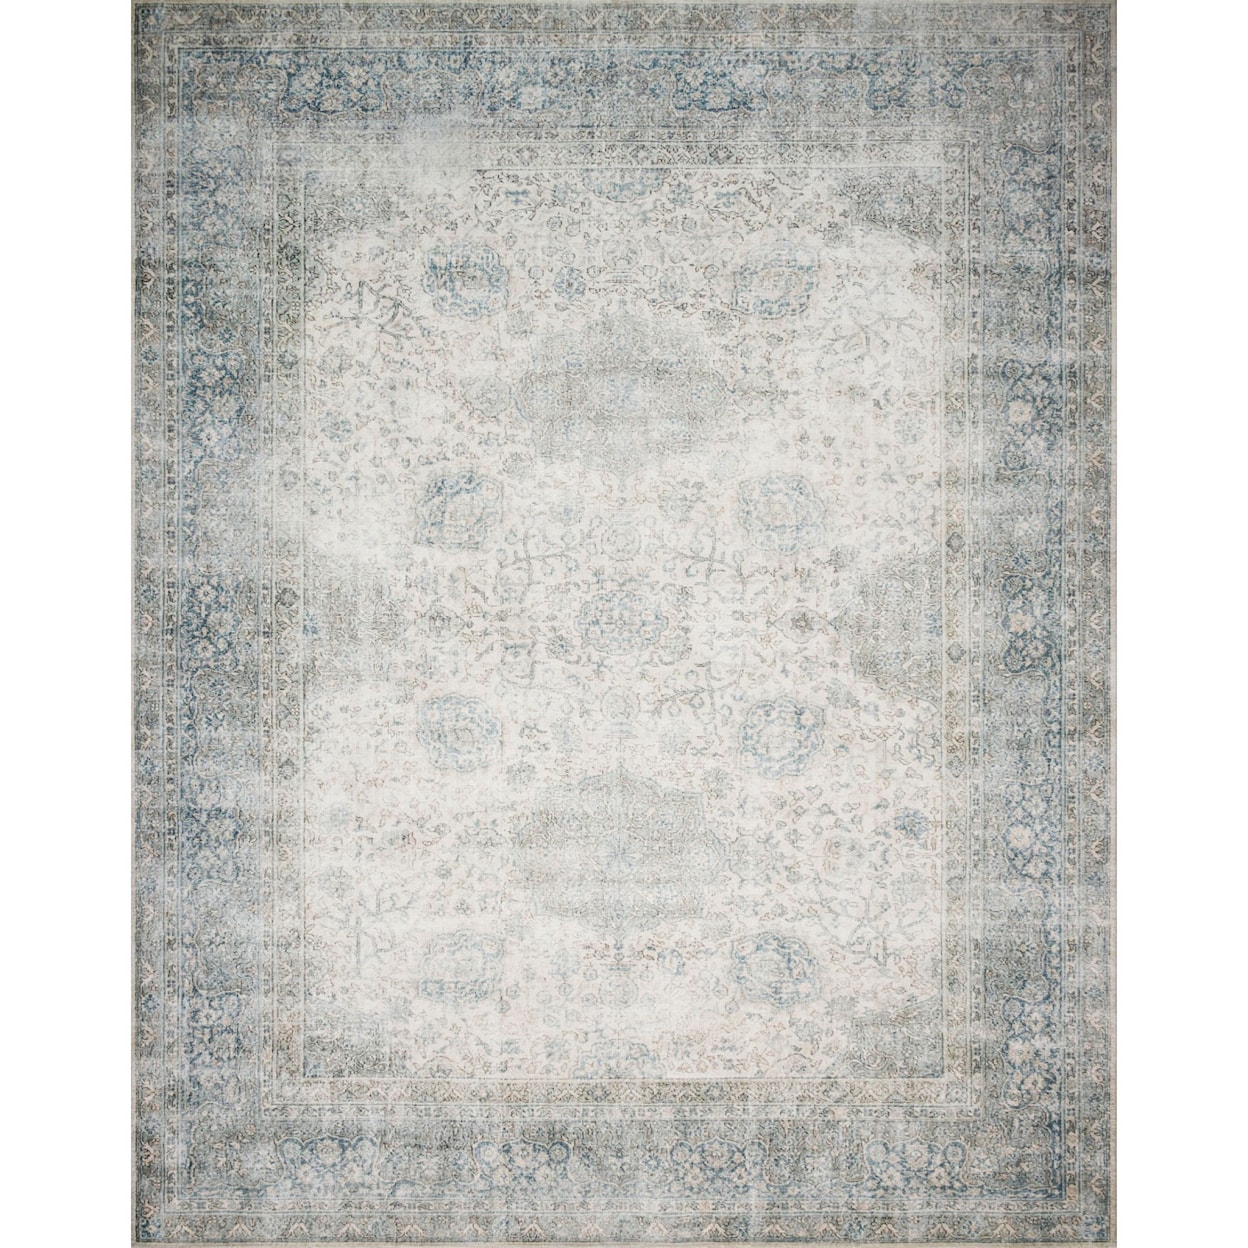 Magnolia Home by Joanna Gaines for Loloi Lucca 7'-6" x 9'-6" Rug